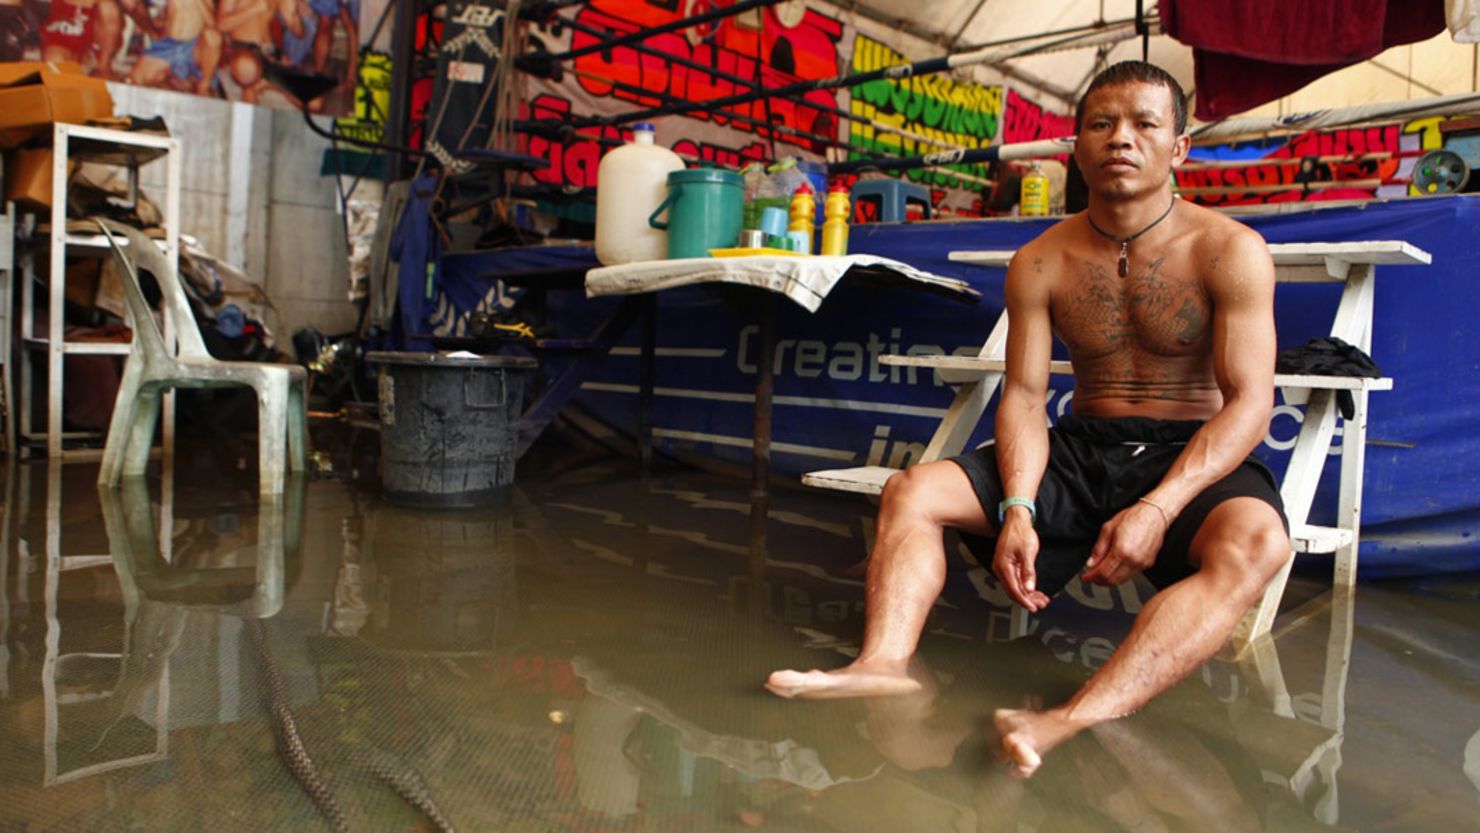 Bangkok Muay Thai fighter Jaroensak Sorwapin says his gym has been dealing with floods for about a month. 